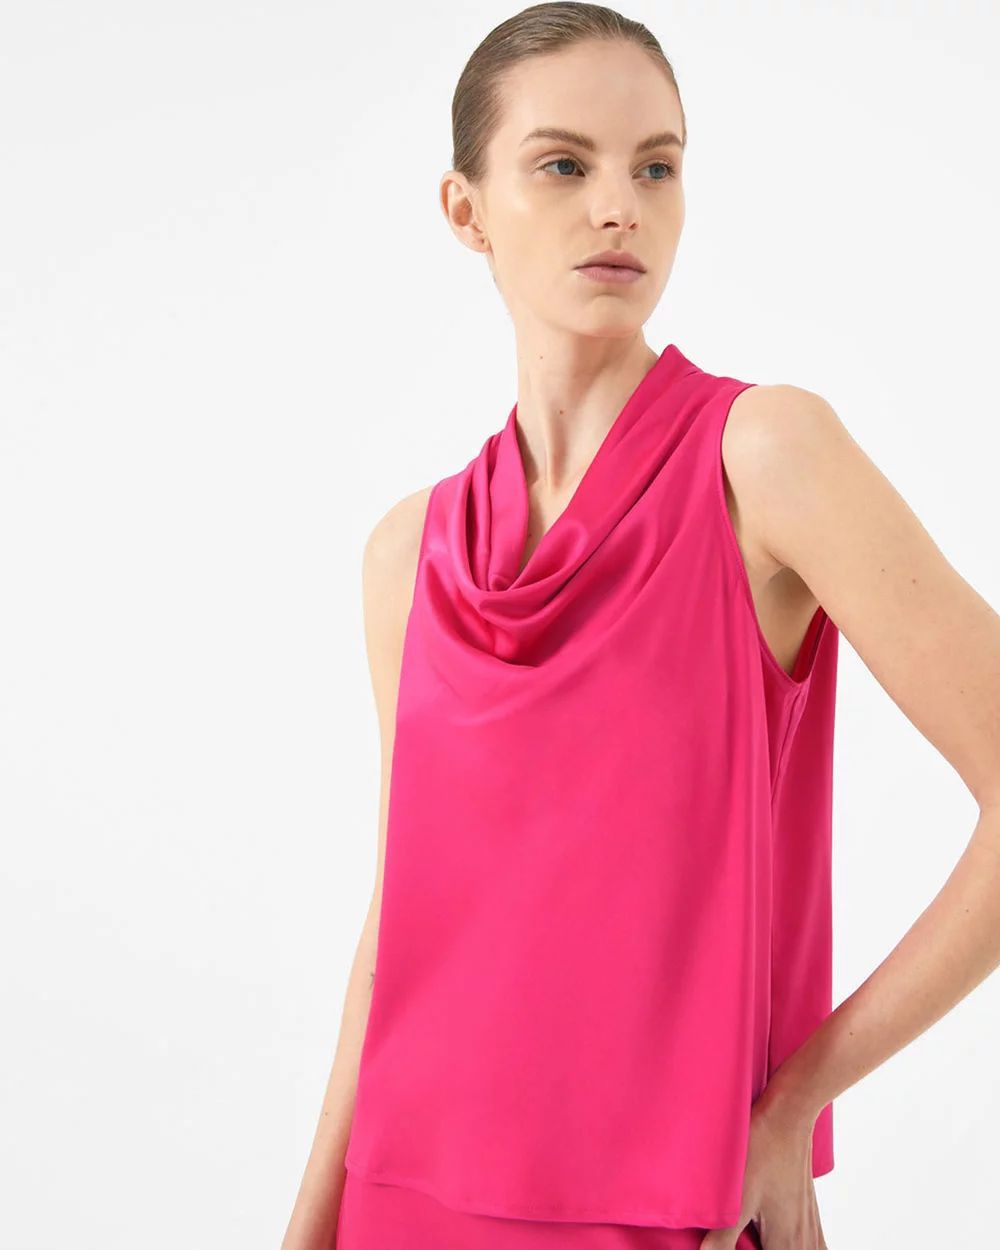 Staria Cowl Neck Top | THE ICONIC (AU & NZ)